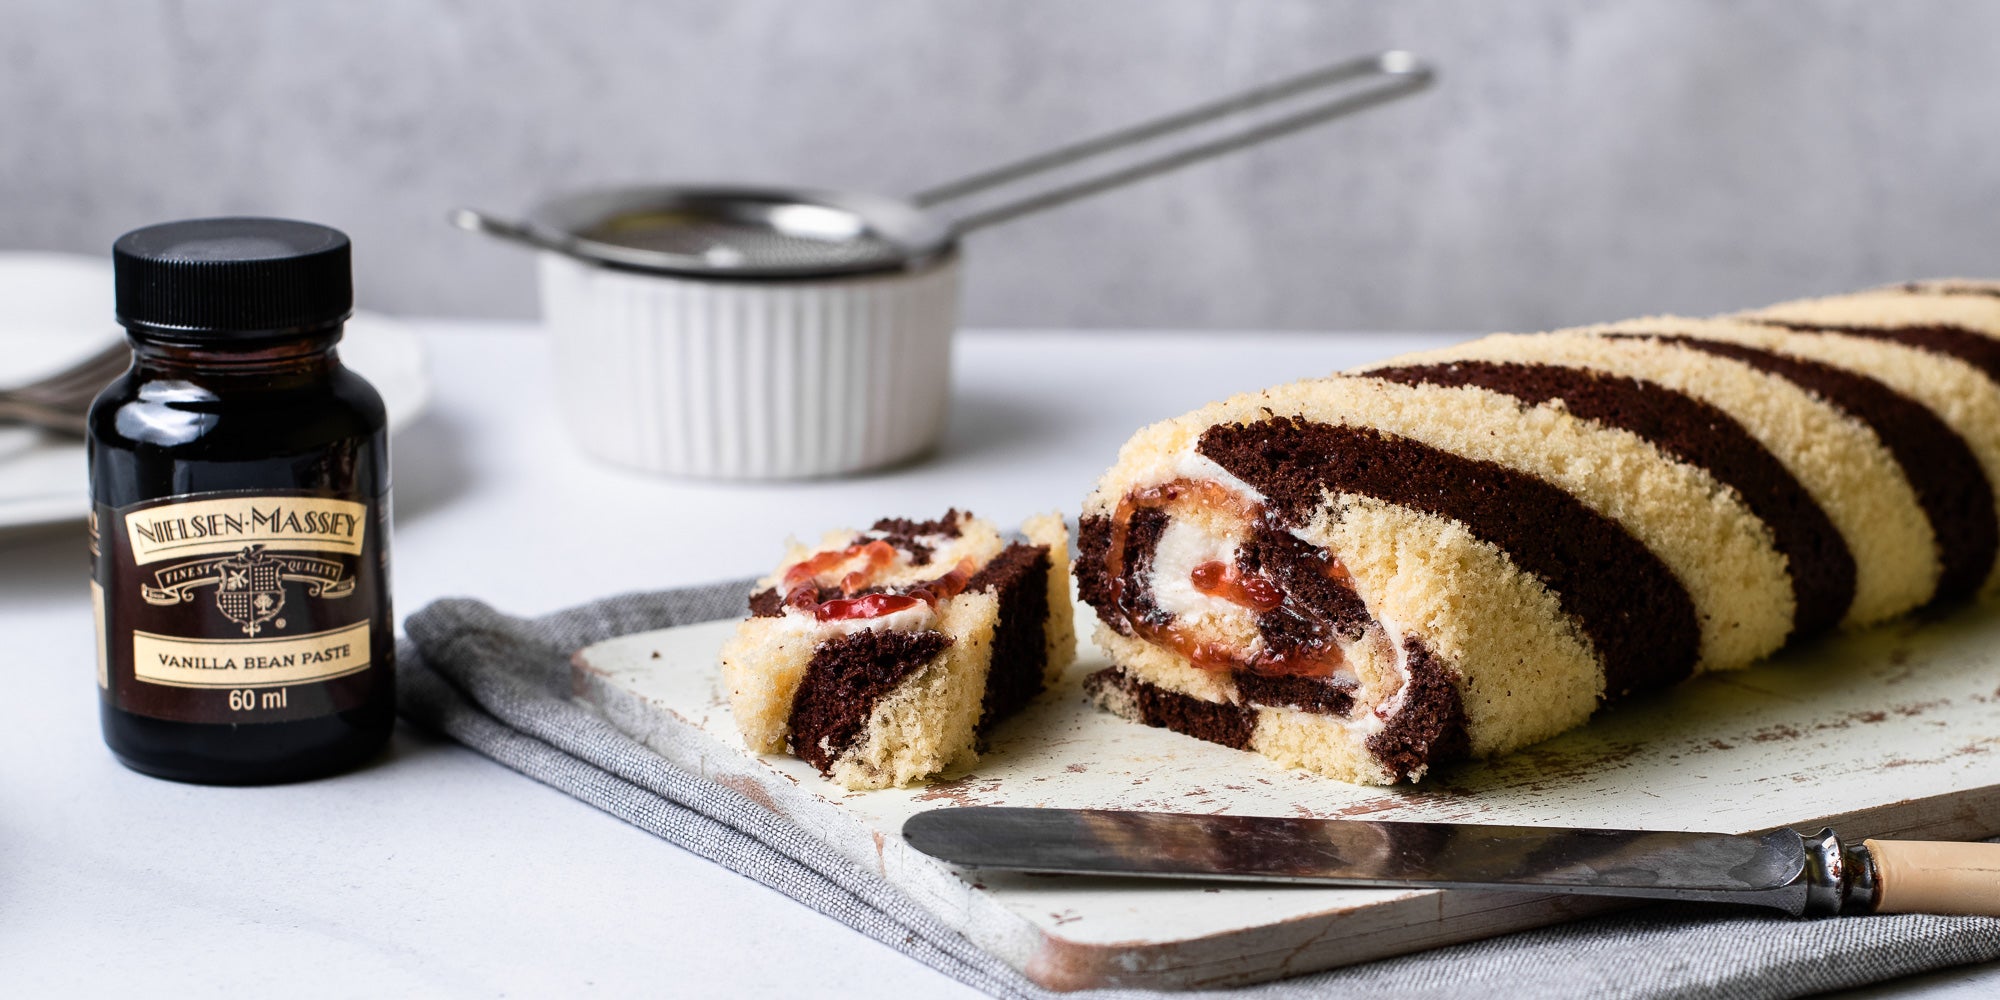 A slice of Chocolate & Vanilla Swiss Roll served on a wooden board, next to a bottle of Nielsen-Massey Vanilla Extract and a ramekin holding a sieve in the background